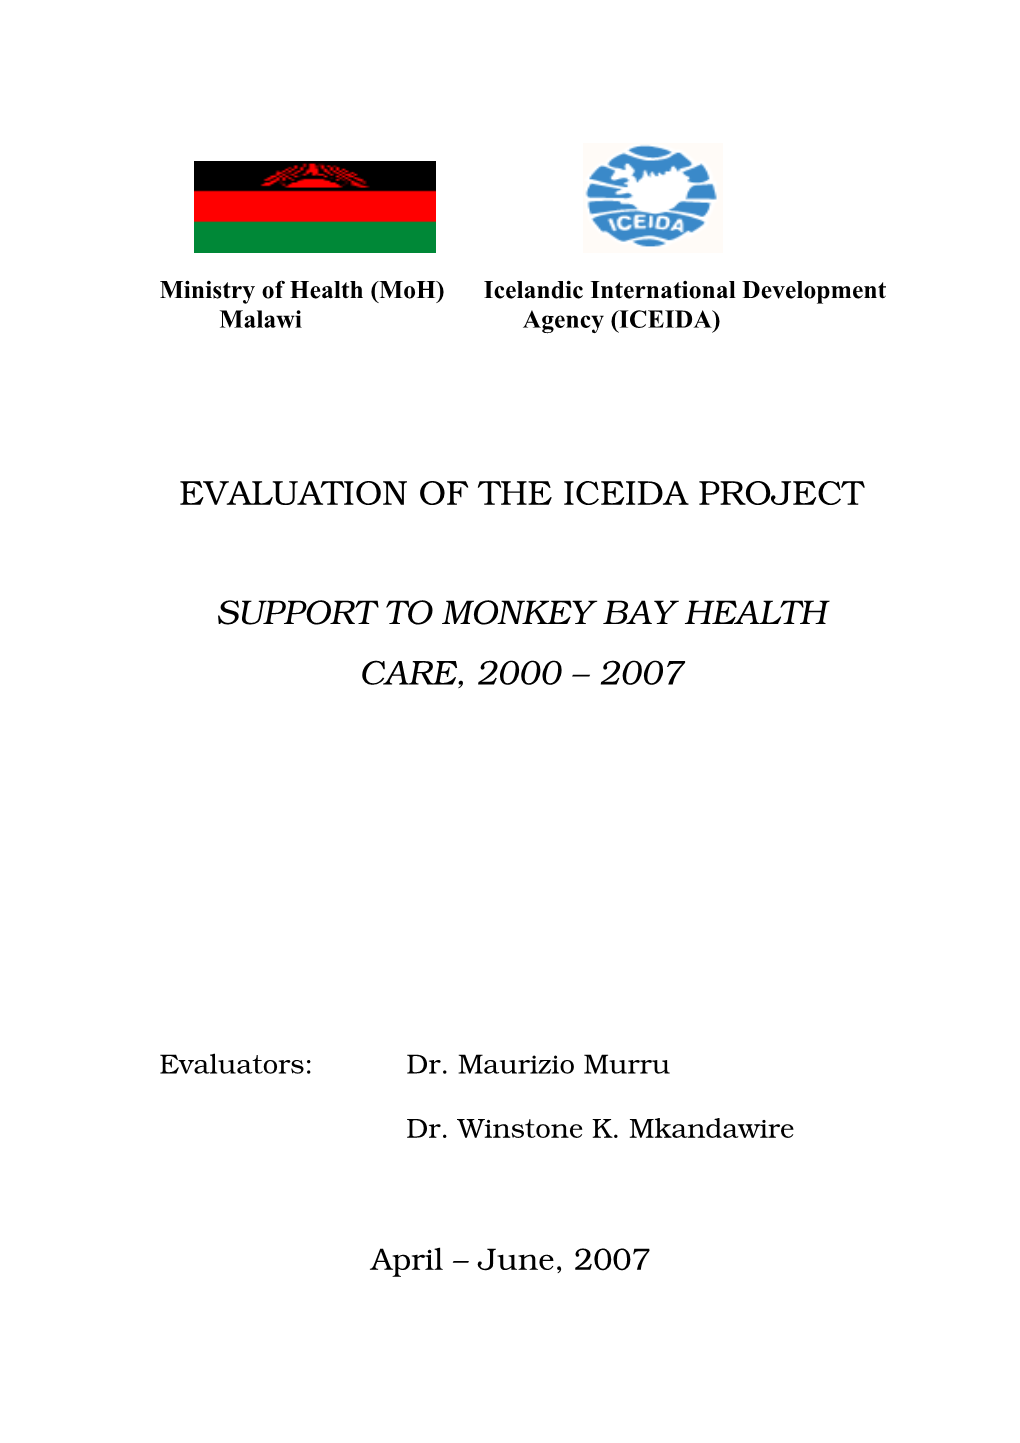 Evaluation of the Iceida Project Support to Monkey Bay Health Care